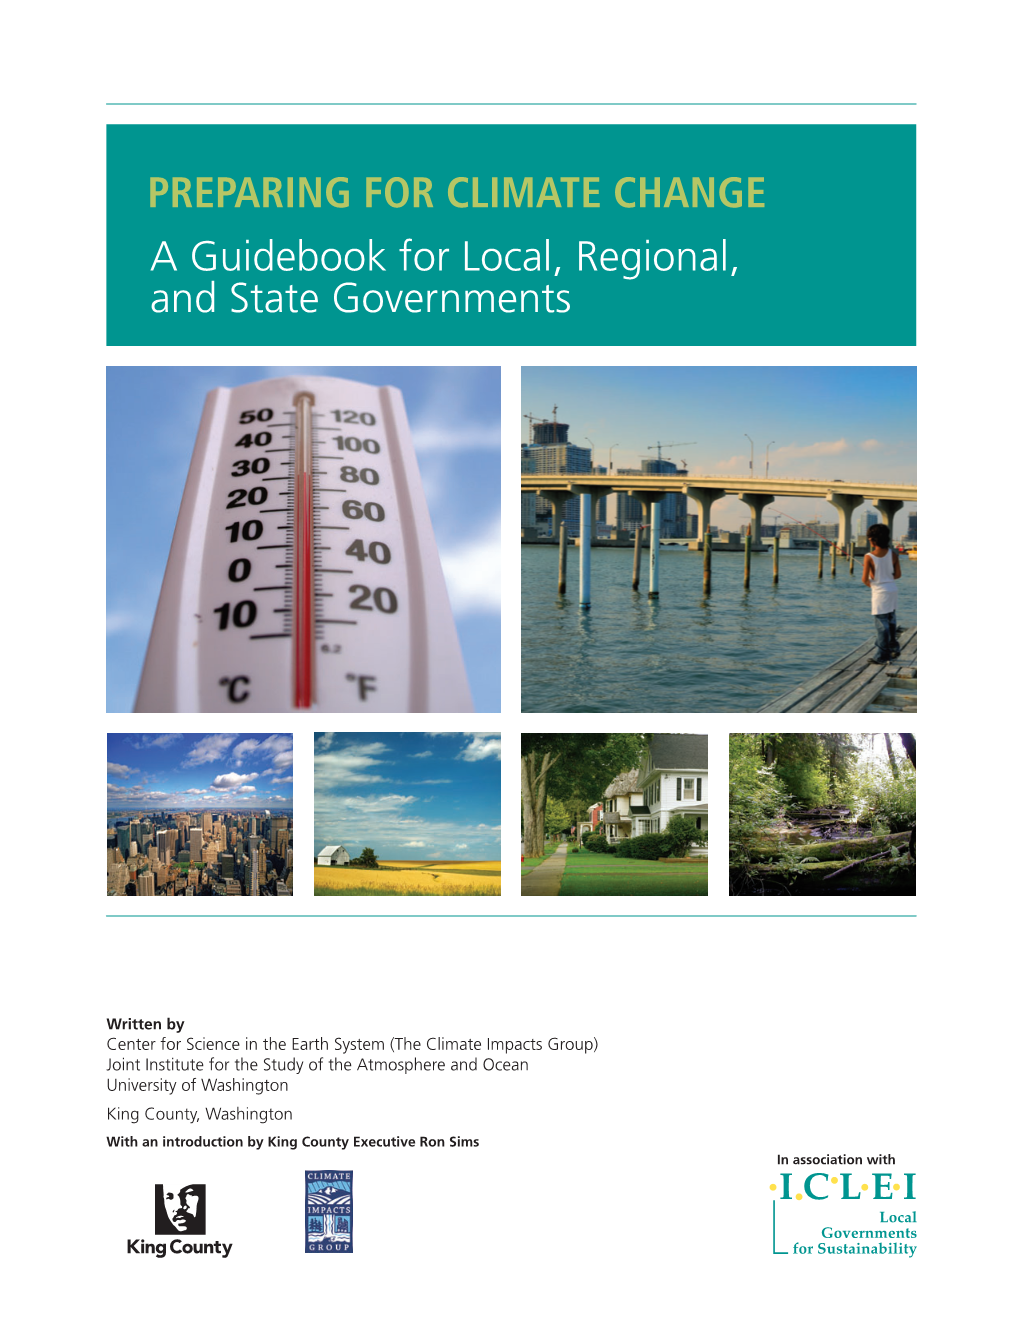 PREPARING for CLIMATE CHANGE a Guidebook for Local, Regional, and State Governments